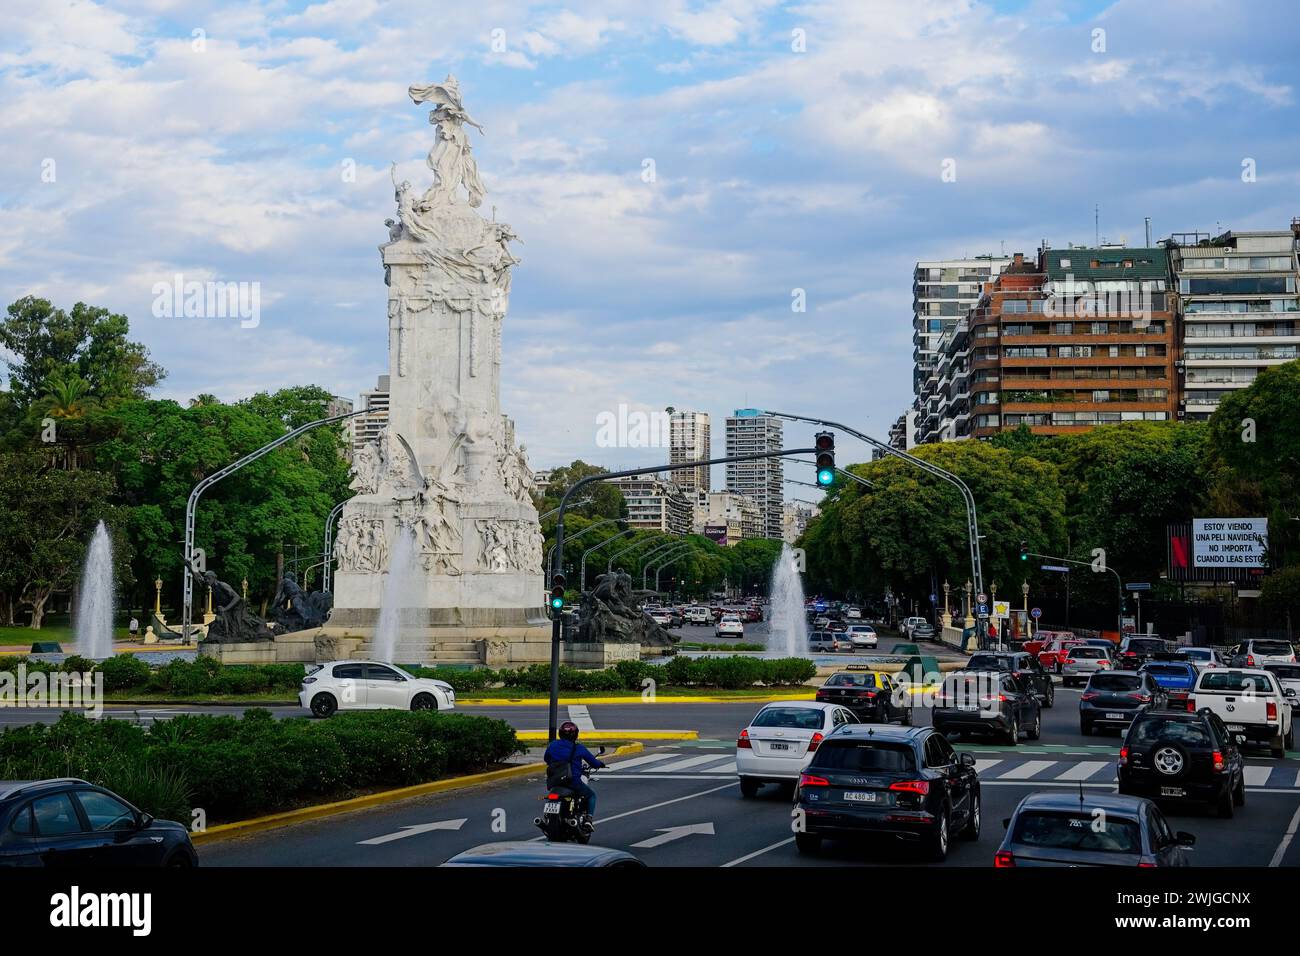 The Monument to the Spaniards, It was donated in 1910 by the Spanish community for the centenary of the May Revolution. On the Avenue del Libertador. Stock Photo